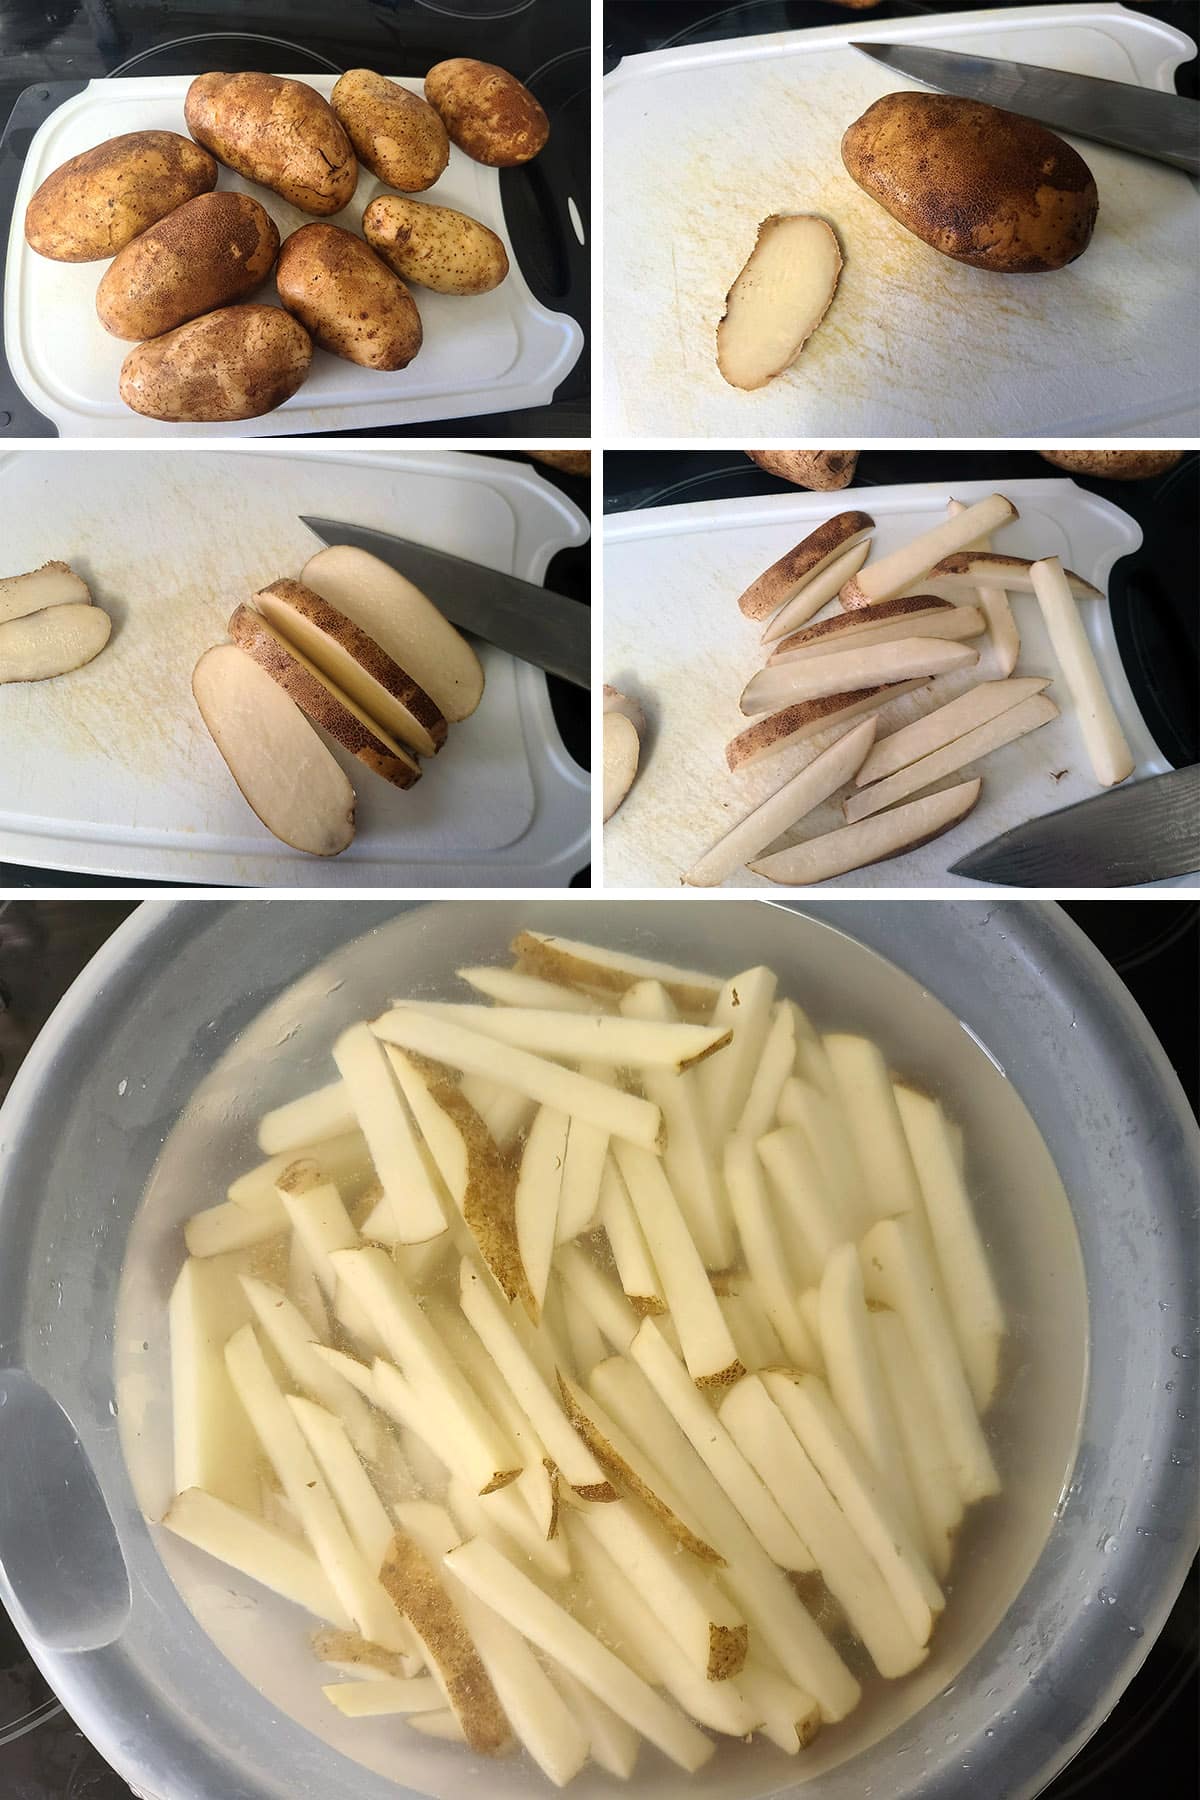 5 part image showing russet potatoes being sliced into fries and soaked in cold water.